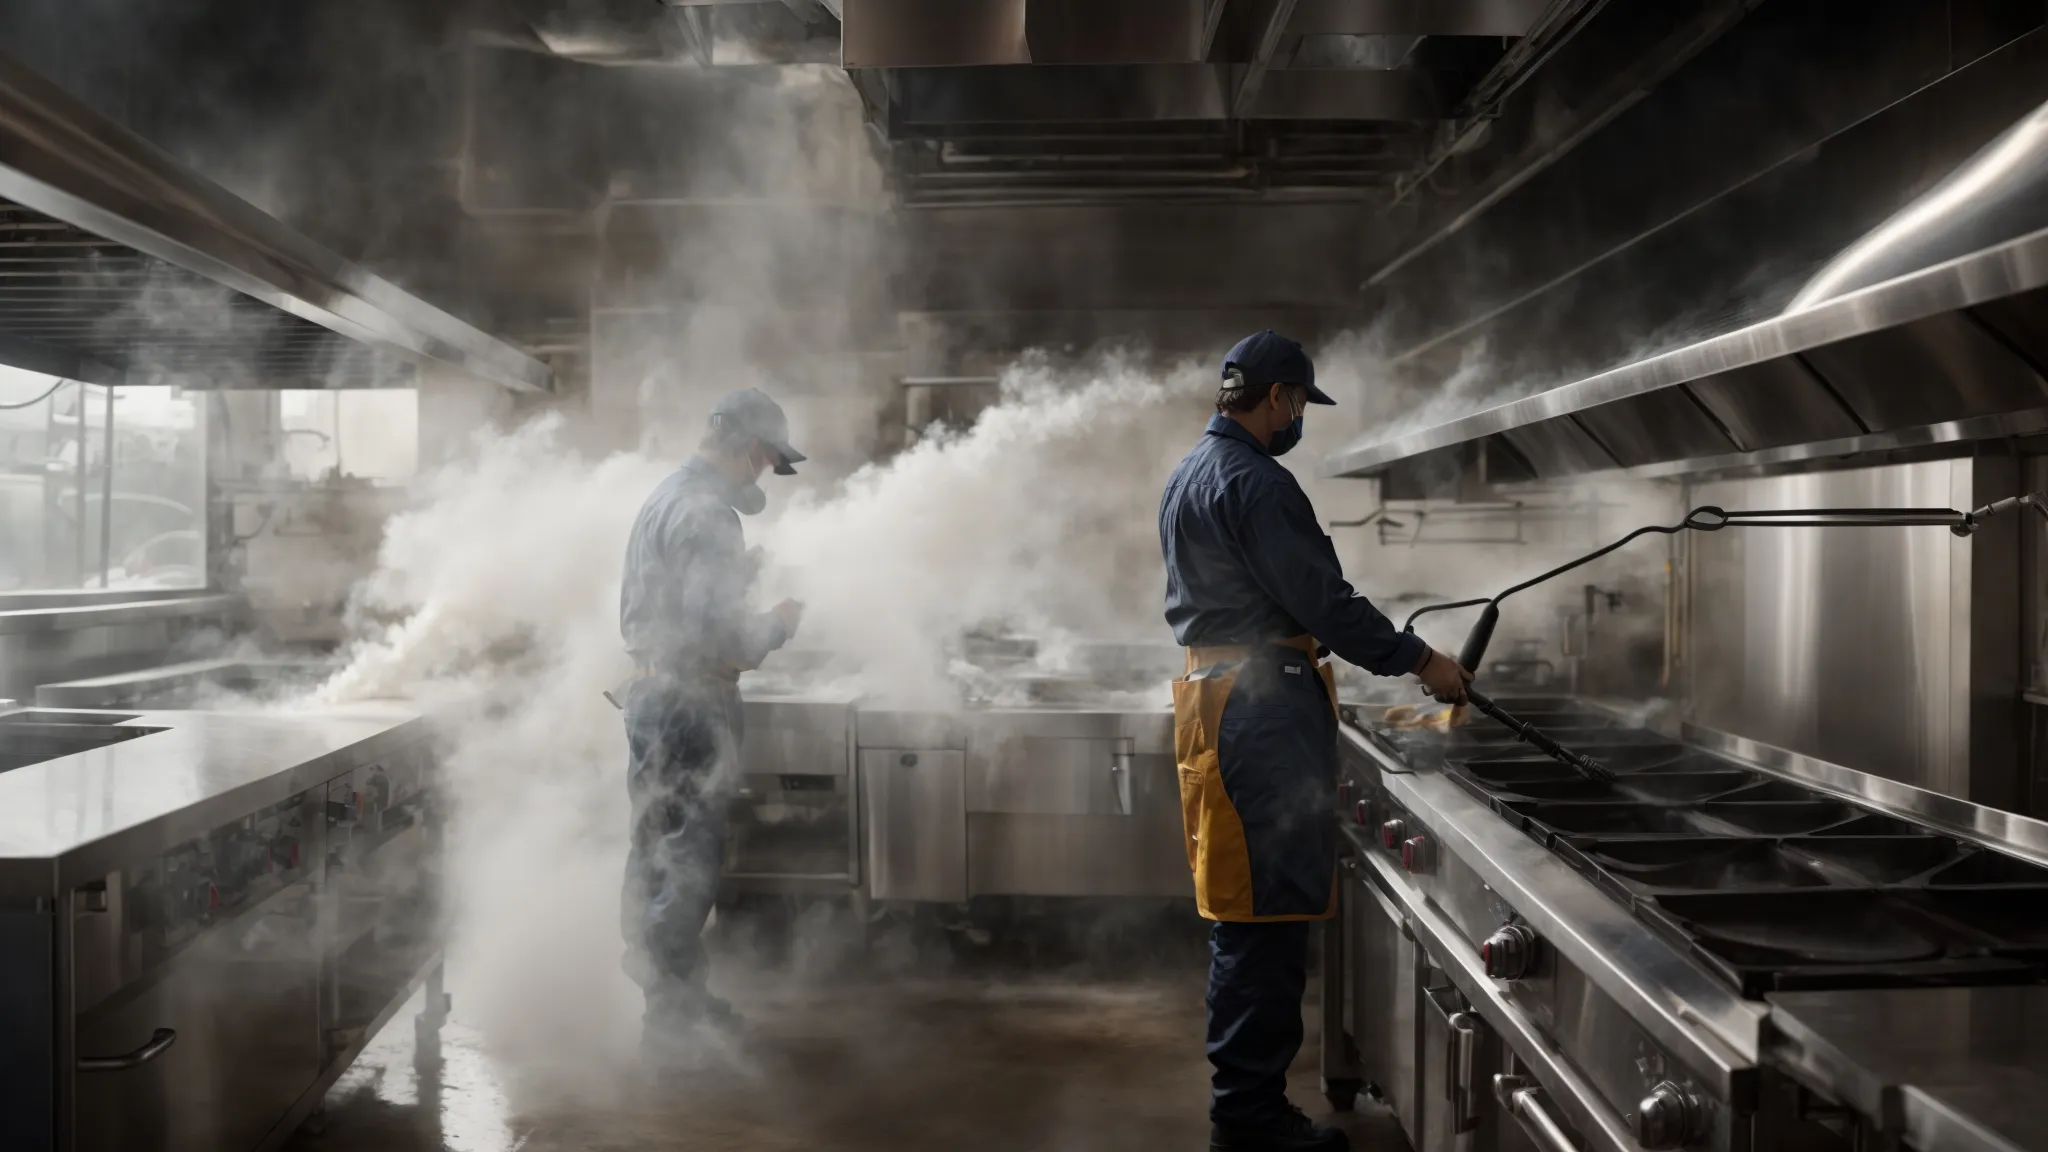 a professional cleaner power-washing the interior of a large restaurant kitchen hood, steam rising against a backdrop of stainless steel.